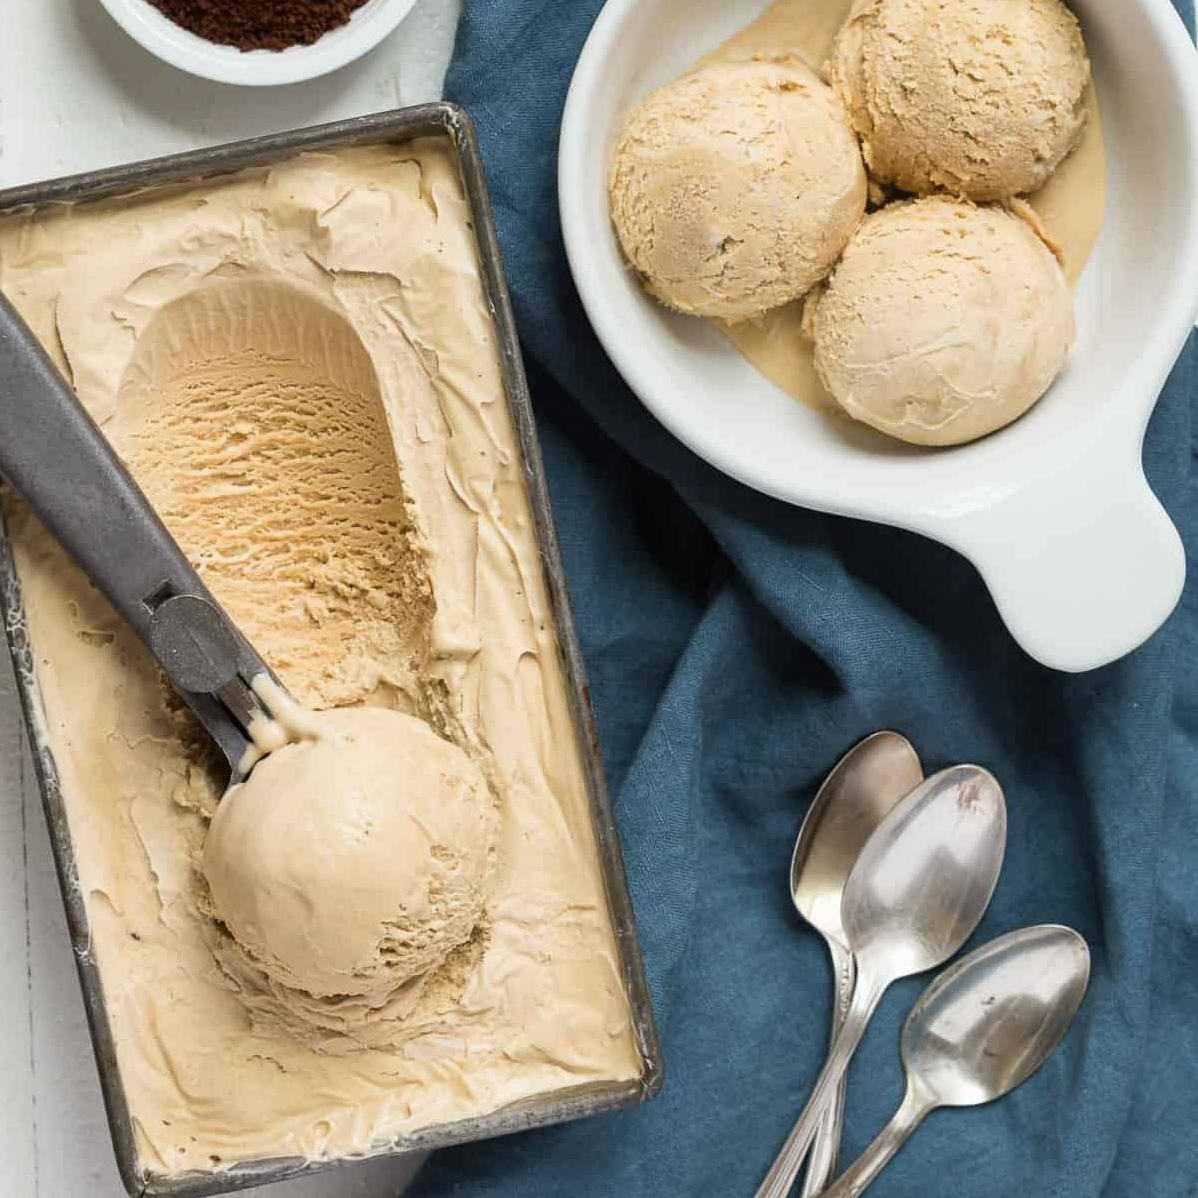  No need to run to the coffee shop for a caffeine fix, just grab a spoonful of this delicious ice cream!